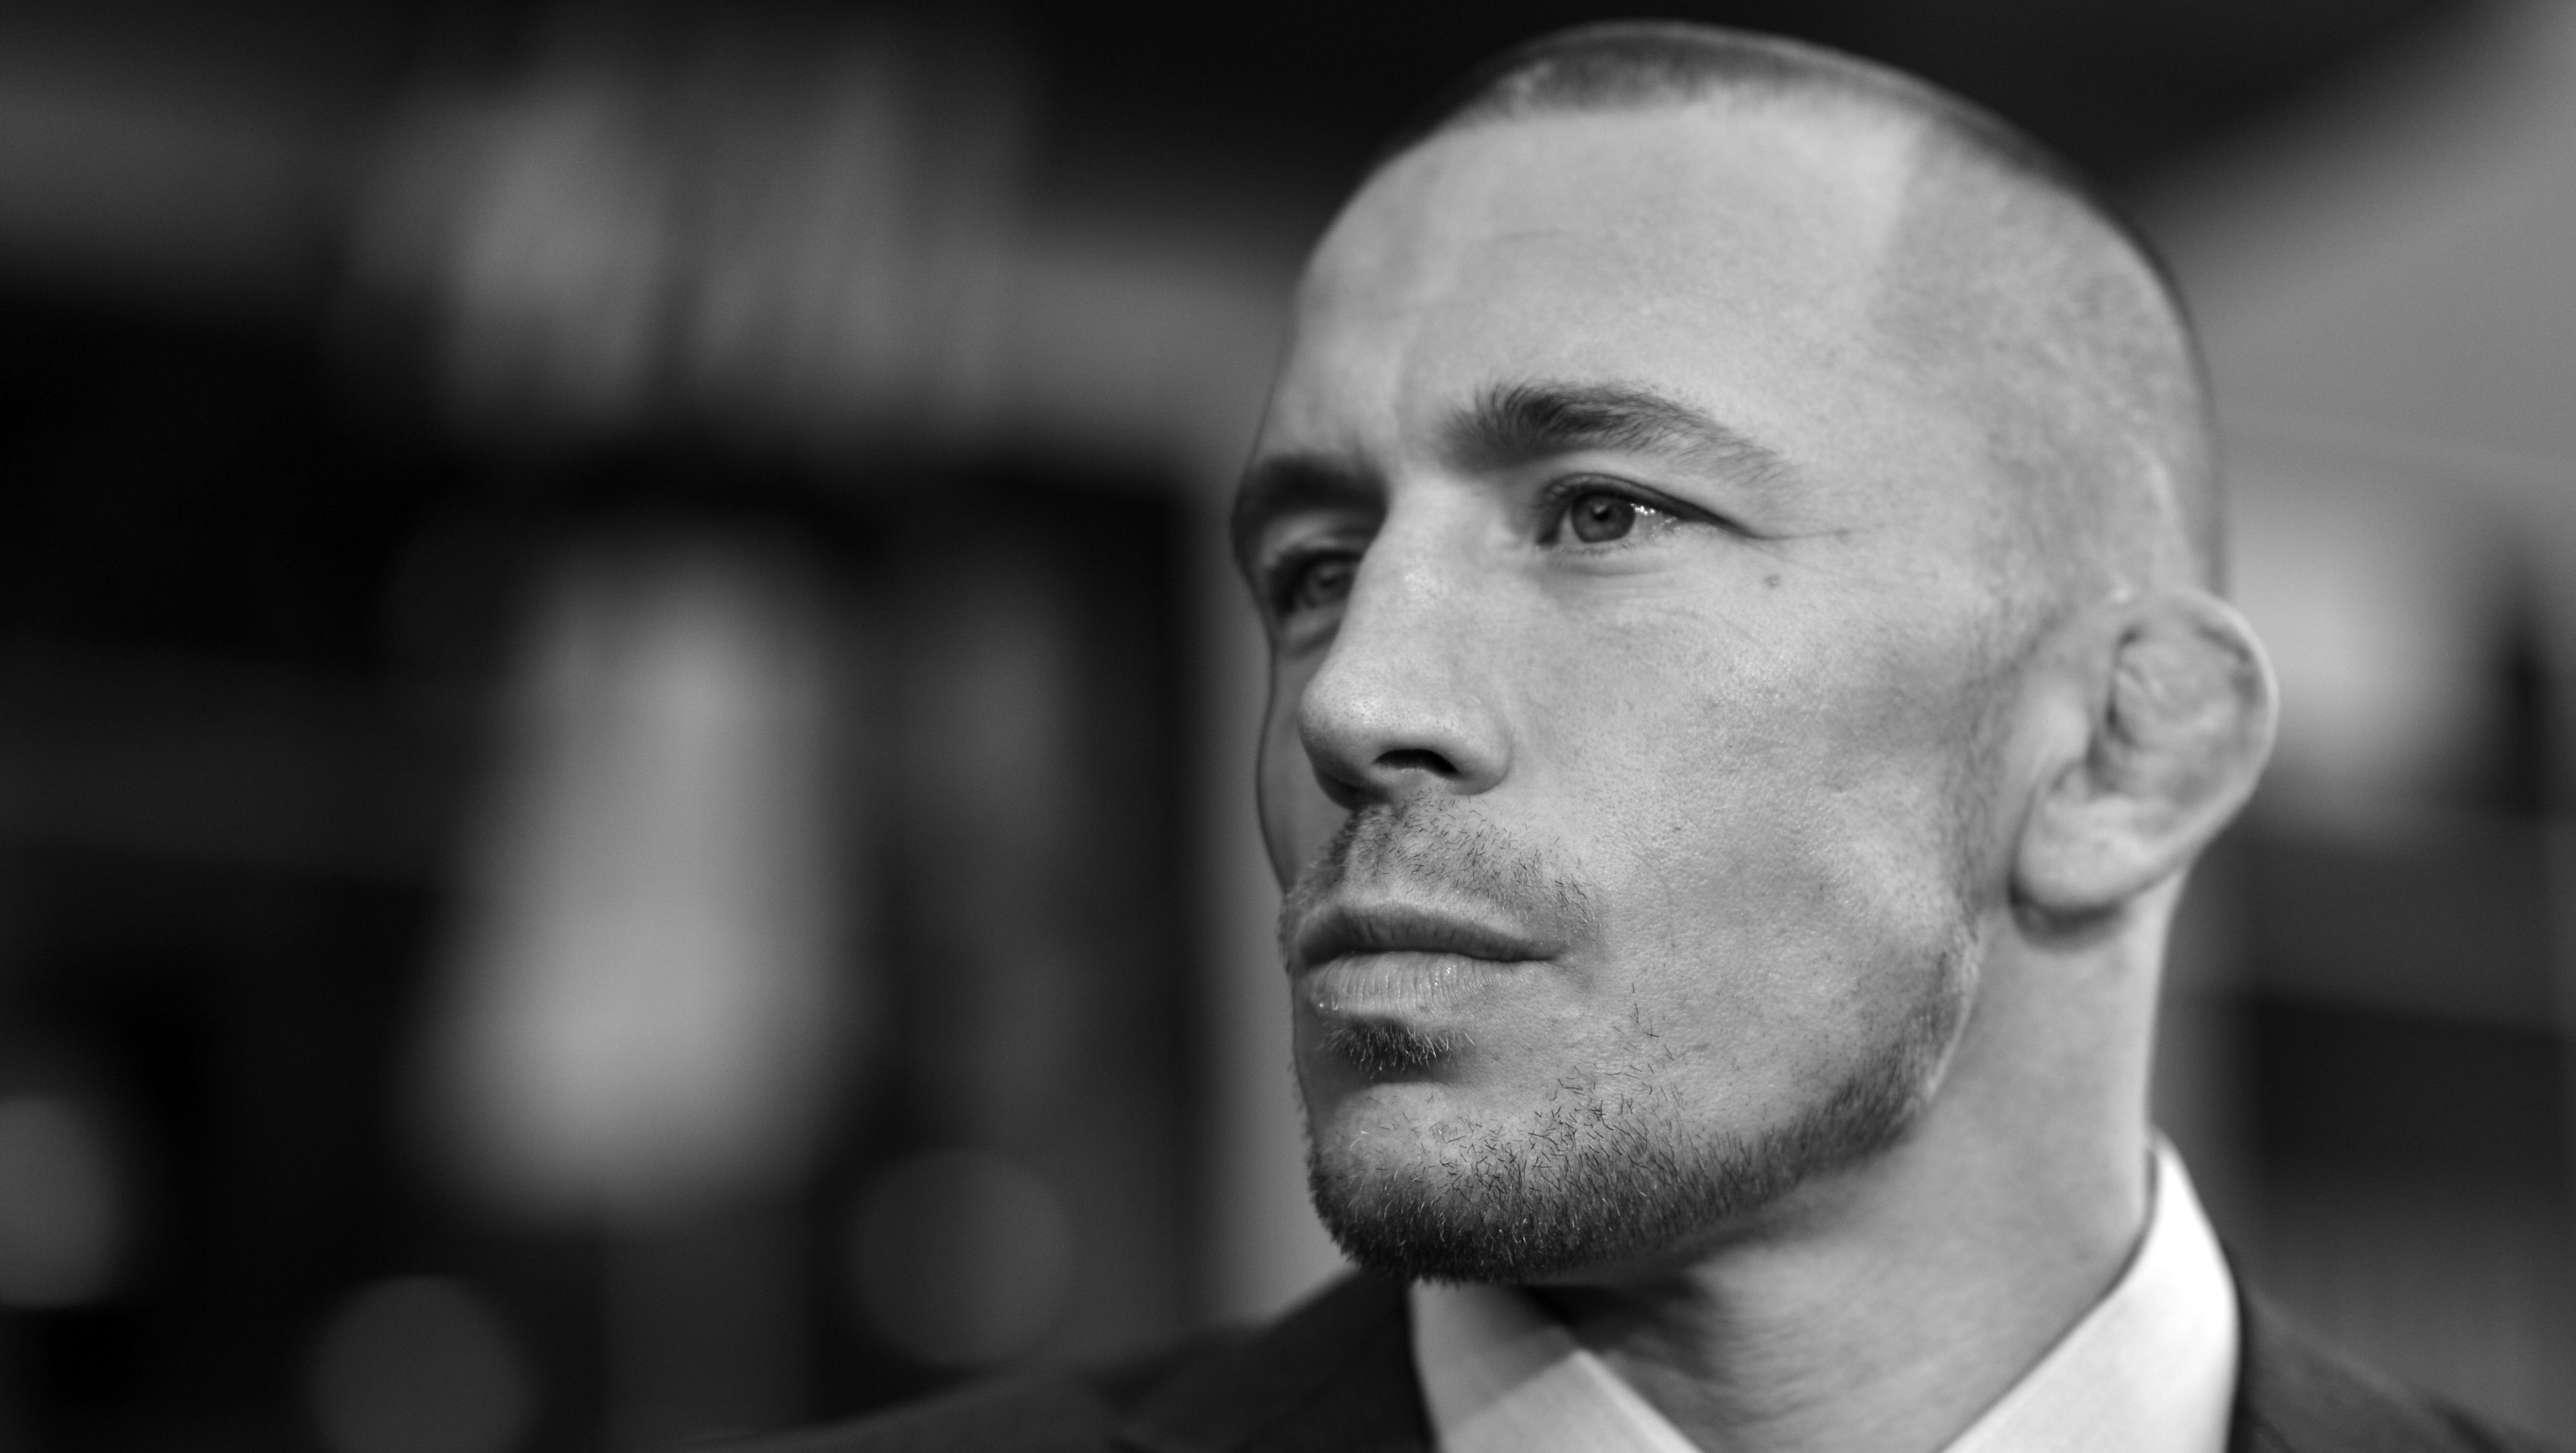 StPierre on Khabib 'They Know Where to Find Me'